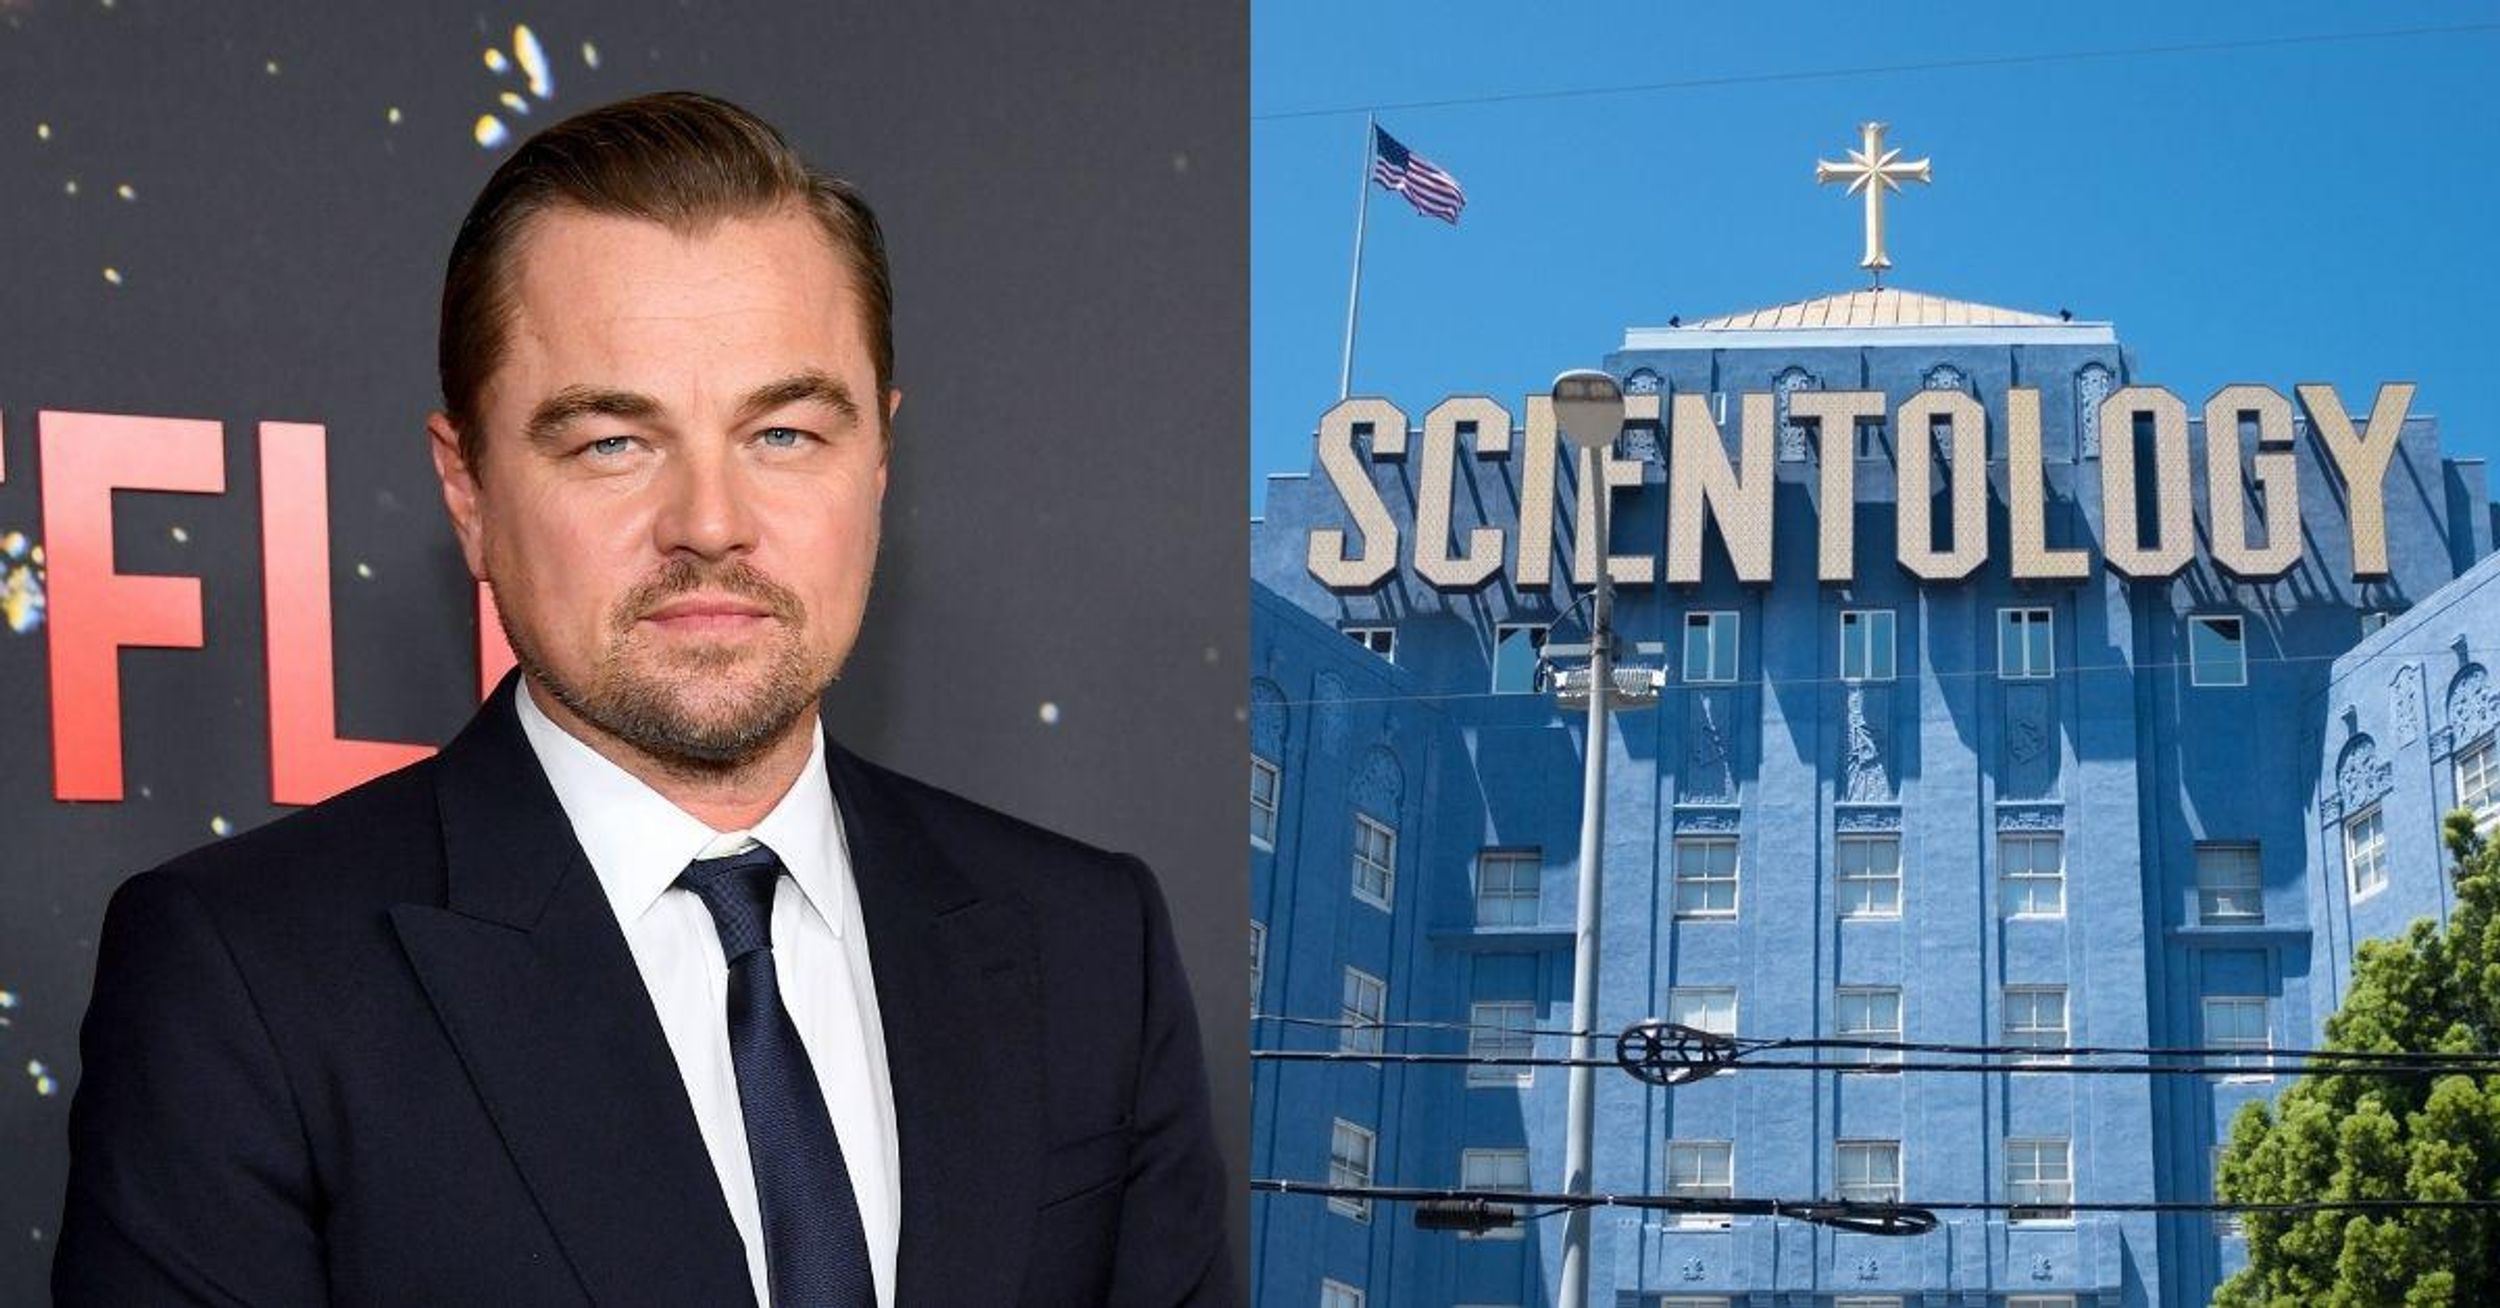 Fake 'Leo DiCaprio' Scammed Texas Widow Out Of $800k By Claiming To Be 'Trapped' In Scientology